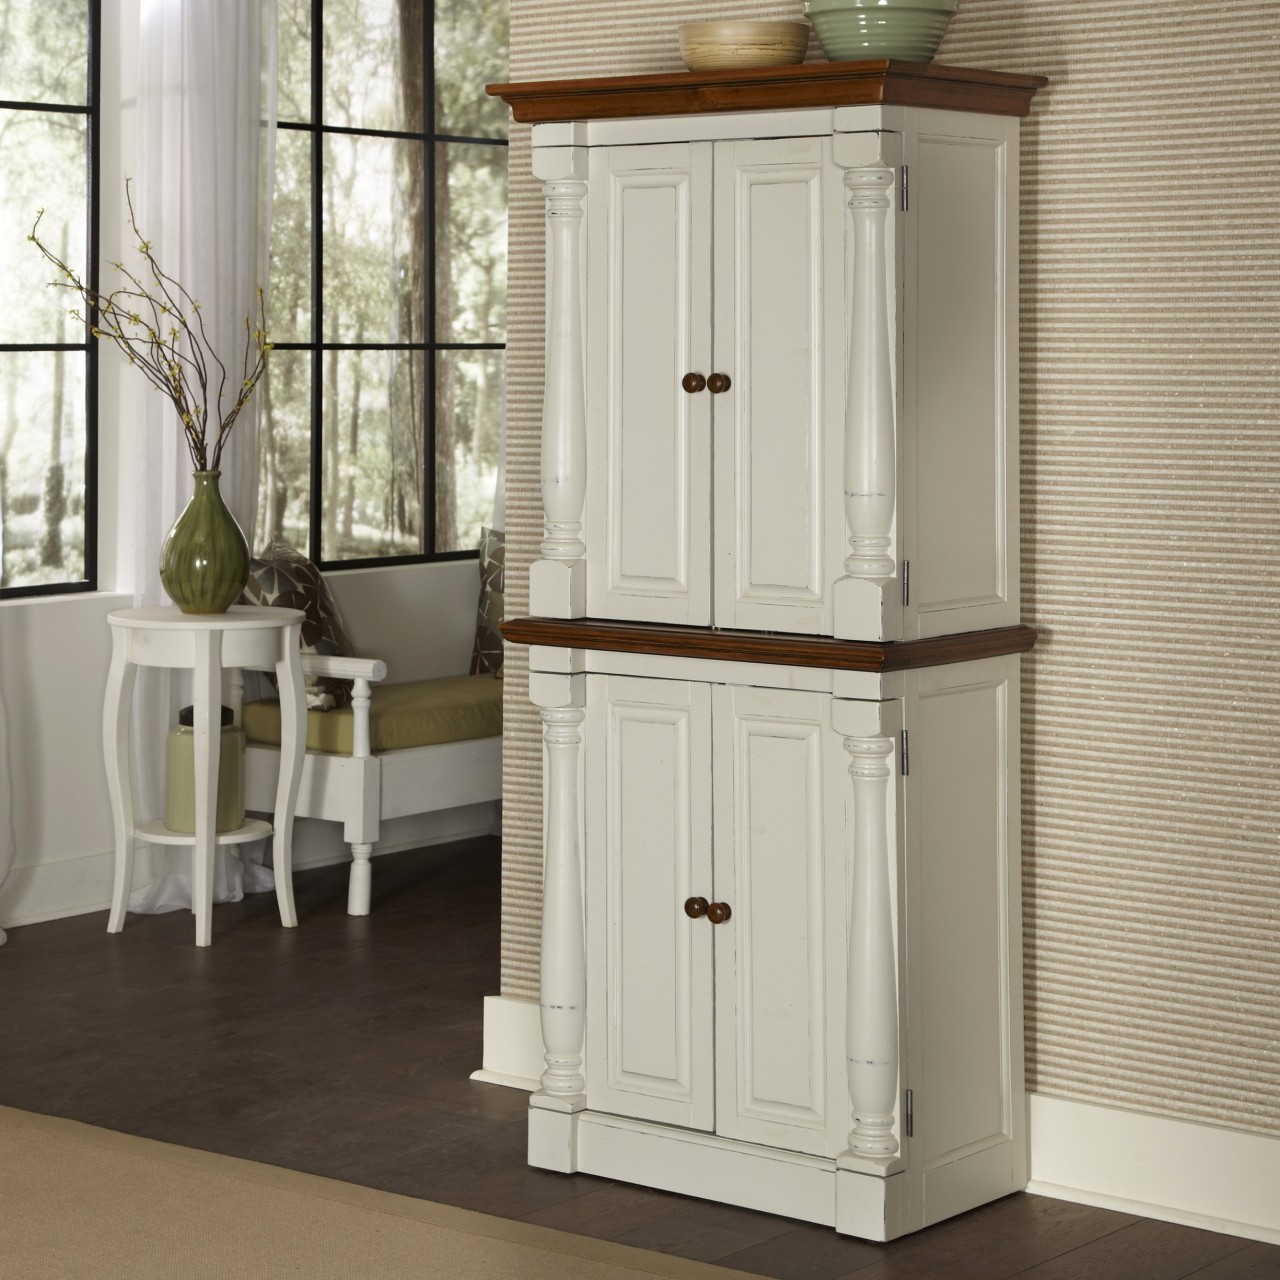 White Kitchen Pantry
 Integrating White Kitchen Pantry Cabinet for Your Storage